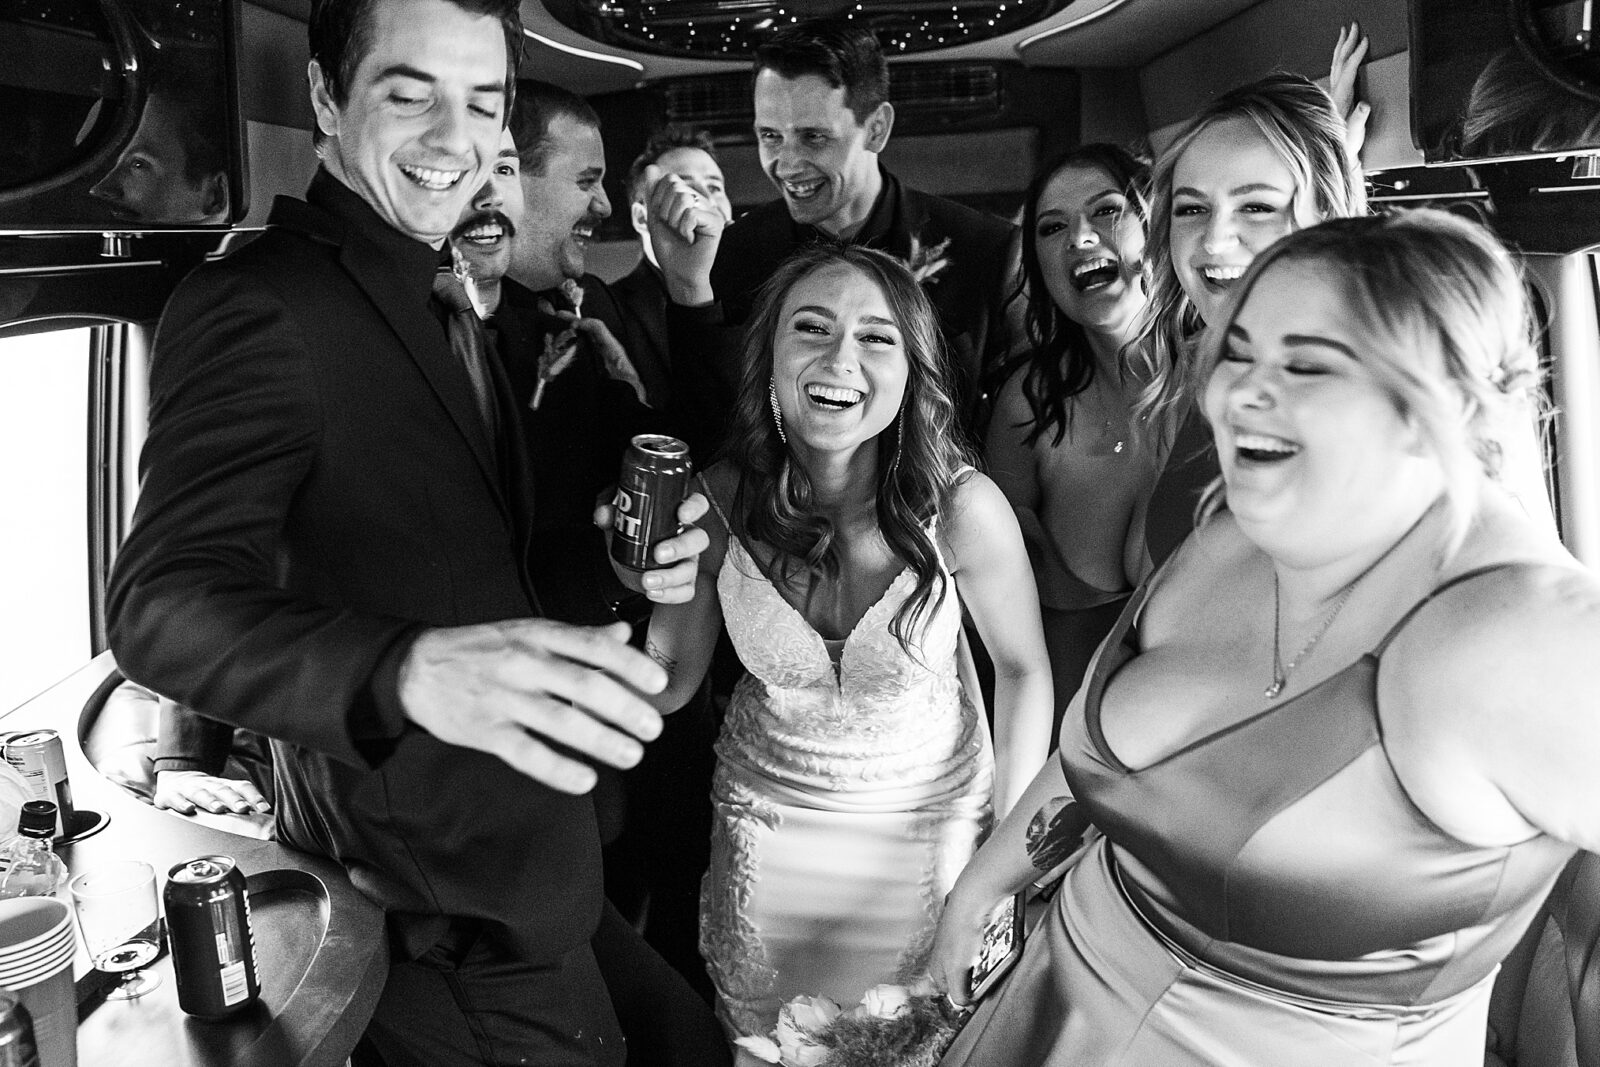 Party on the bus with the wedding party